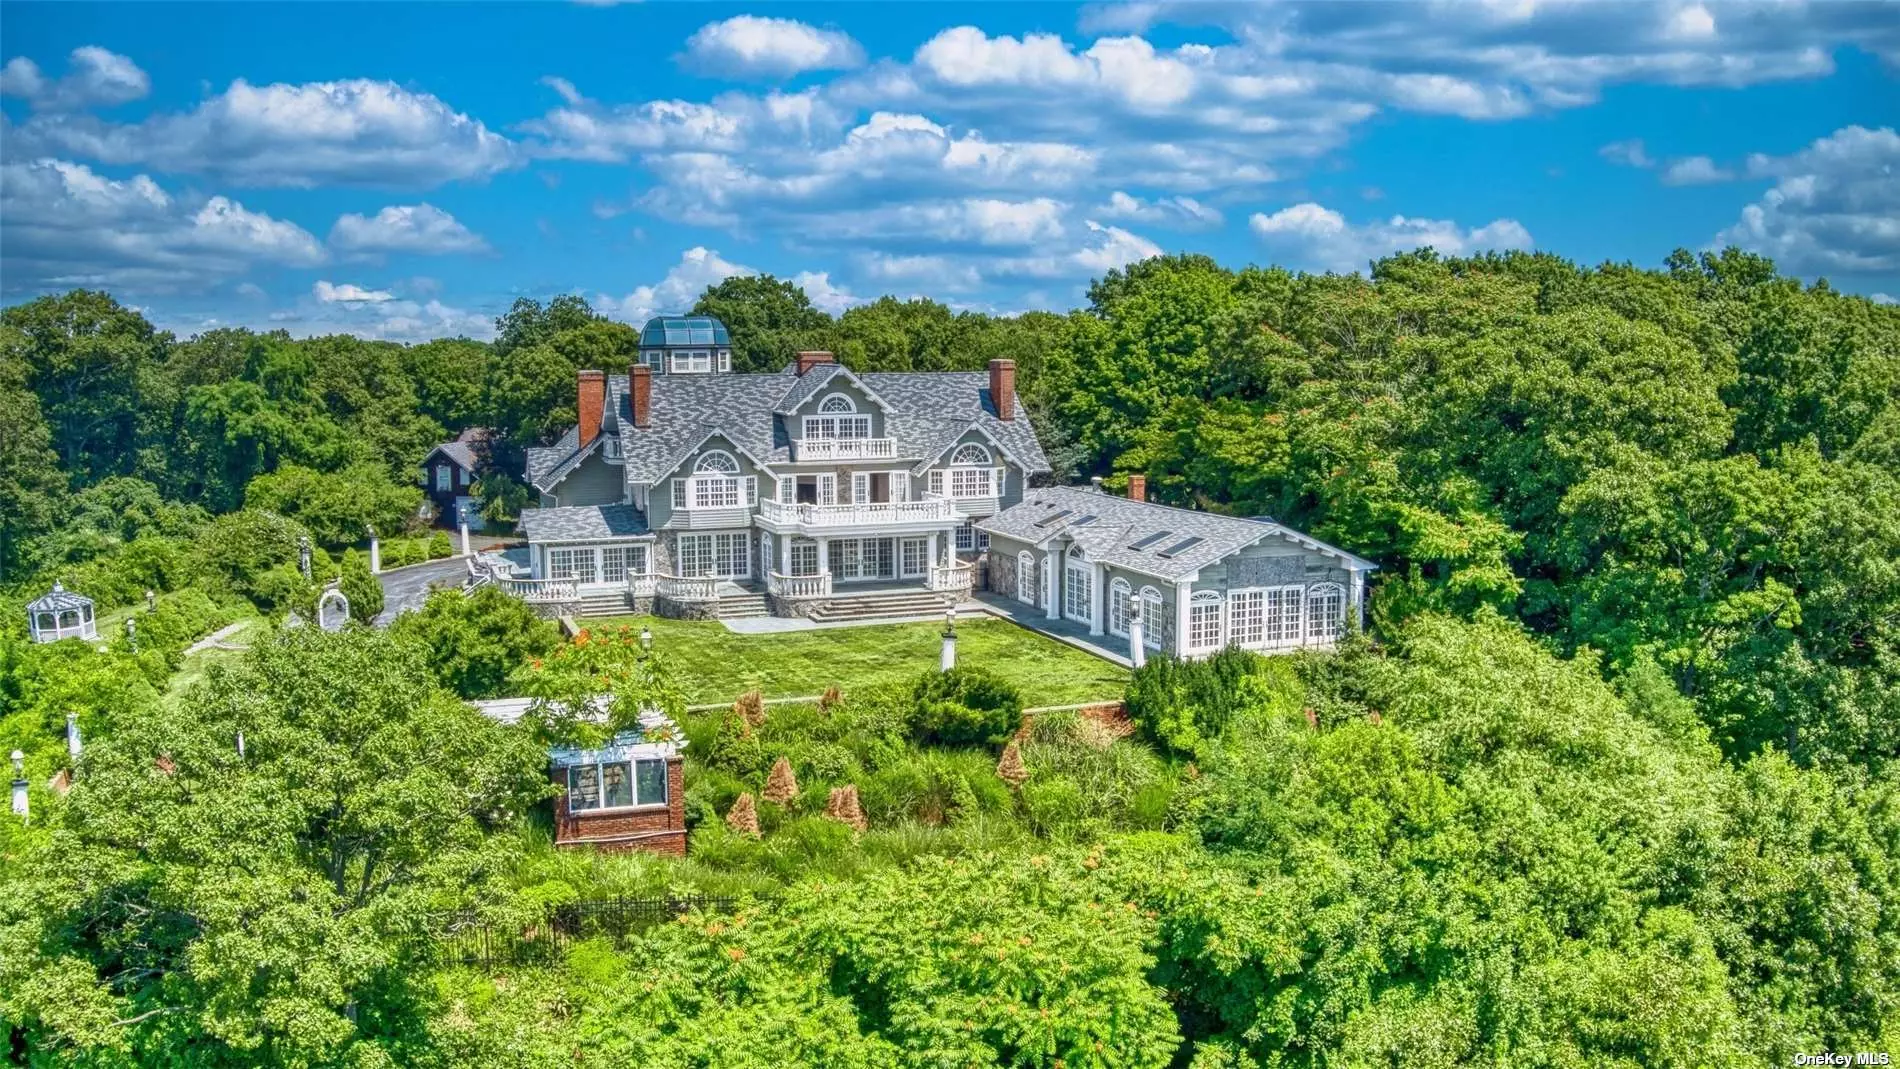 An Iconic and historic 10.9 acre Estate set proudly into the distinguished Waterfront Bluffs of Belle Terre. Serenity Estates, a composition of 7 Subdivided lots (9.5 Acres) and an additional 1.4 Acre premium Waterfront Subdivision make for one of North Shore Long Island&rsquo;s most remarkable purchase opportunities. 600&rsquo; of beachfront. 4 Waterfront and 4 Waterview Subdivisions in total. Elevated unobstructed and panoramic Sunset views of Port Jefferson Harbor, Pirates Cove and Long Island Sound. Existing 13, 800 Square foot Historic Waterfront Mansion constructed circa 1900. Gated entrance through fully lighted private Driveway into circular Auto Court and 3 Story Portes-Cocheres covered entrance. 5 Levels of Coastal luxury serviced by 3 Staircases and Elevator. Enter through oversized French Double Doors into a Sun-drenched Cathedral Foyer with Dual Sided Fireplace, Mezzanine Balcony and Side Hall Colonial Ballroom Staircase. Glass French Sliders span the Waterfront West Wall and provide egress to wraparound Blue Stone Deck and Courtyard. Chef&rsquo;s Kitchen with Dual Ranges, Dual Oven, Gas Fired Grill, Viking Professional Series Vented Hood, Oversized 6&rsquo;x24&rsquo; Center Island. Butler&rsquo;s Accessory Bar Room. Harbor-side panoramic Breakfast and Dining Rooms. Swimming Hall with 10 Person Spa and Lap Pool wrapped in Glass sliding French Doors. Mezzanine level includes Calacatta Marble Master Wing and Suite with Deck overlooking the Harbors. Dual Master Fireplaces. 2 Guest Bedrooms with Harbor-side Balconies and Fireplaces. Au Pair&rsquo;s Wing with separate entrance. 3rd story Lounge and Bar with Striking Center Chimney and Panoramic Harbor side Sunset views off Balcony. Accessory Guest Bedroom and Bath. 4th floor Widow&rsquo;s Peak and sweeping 360* domed Glass Observatory provide unrivaled views of the Harbor and Sunset. Finished Basement with Living, Media, Fitness, Sauna and Full Bathroom. 7 Bedroom, 5 Full Bathroom and 2 Half Bathroom. 22 Rooms in total. Granite Foundation, Apron and Retaining Walls. Composite Slate Roof equipped with Ice Cleats. Property features a 2, 650&rsquo; 2 Story Barn, 2, 250&rsquo; Stable and Workshop and an additional free standing 1, 650&rsquo; Cottage for Groundskeeper. Privately set deep off access road. Perfect for Equestrian Farm and Stable. Wonderful setting for Vineyard. Moments from Beaches, Golf Course, Country Club, Marina and all the amenities of Port Jefferson Village.